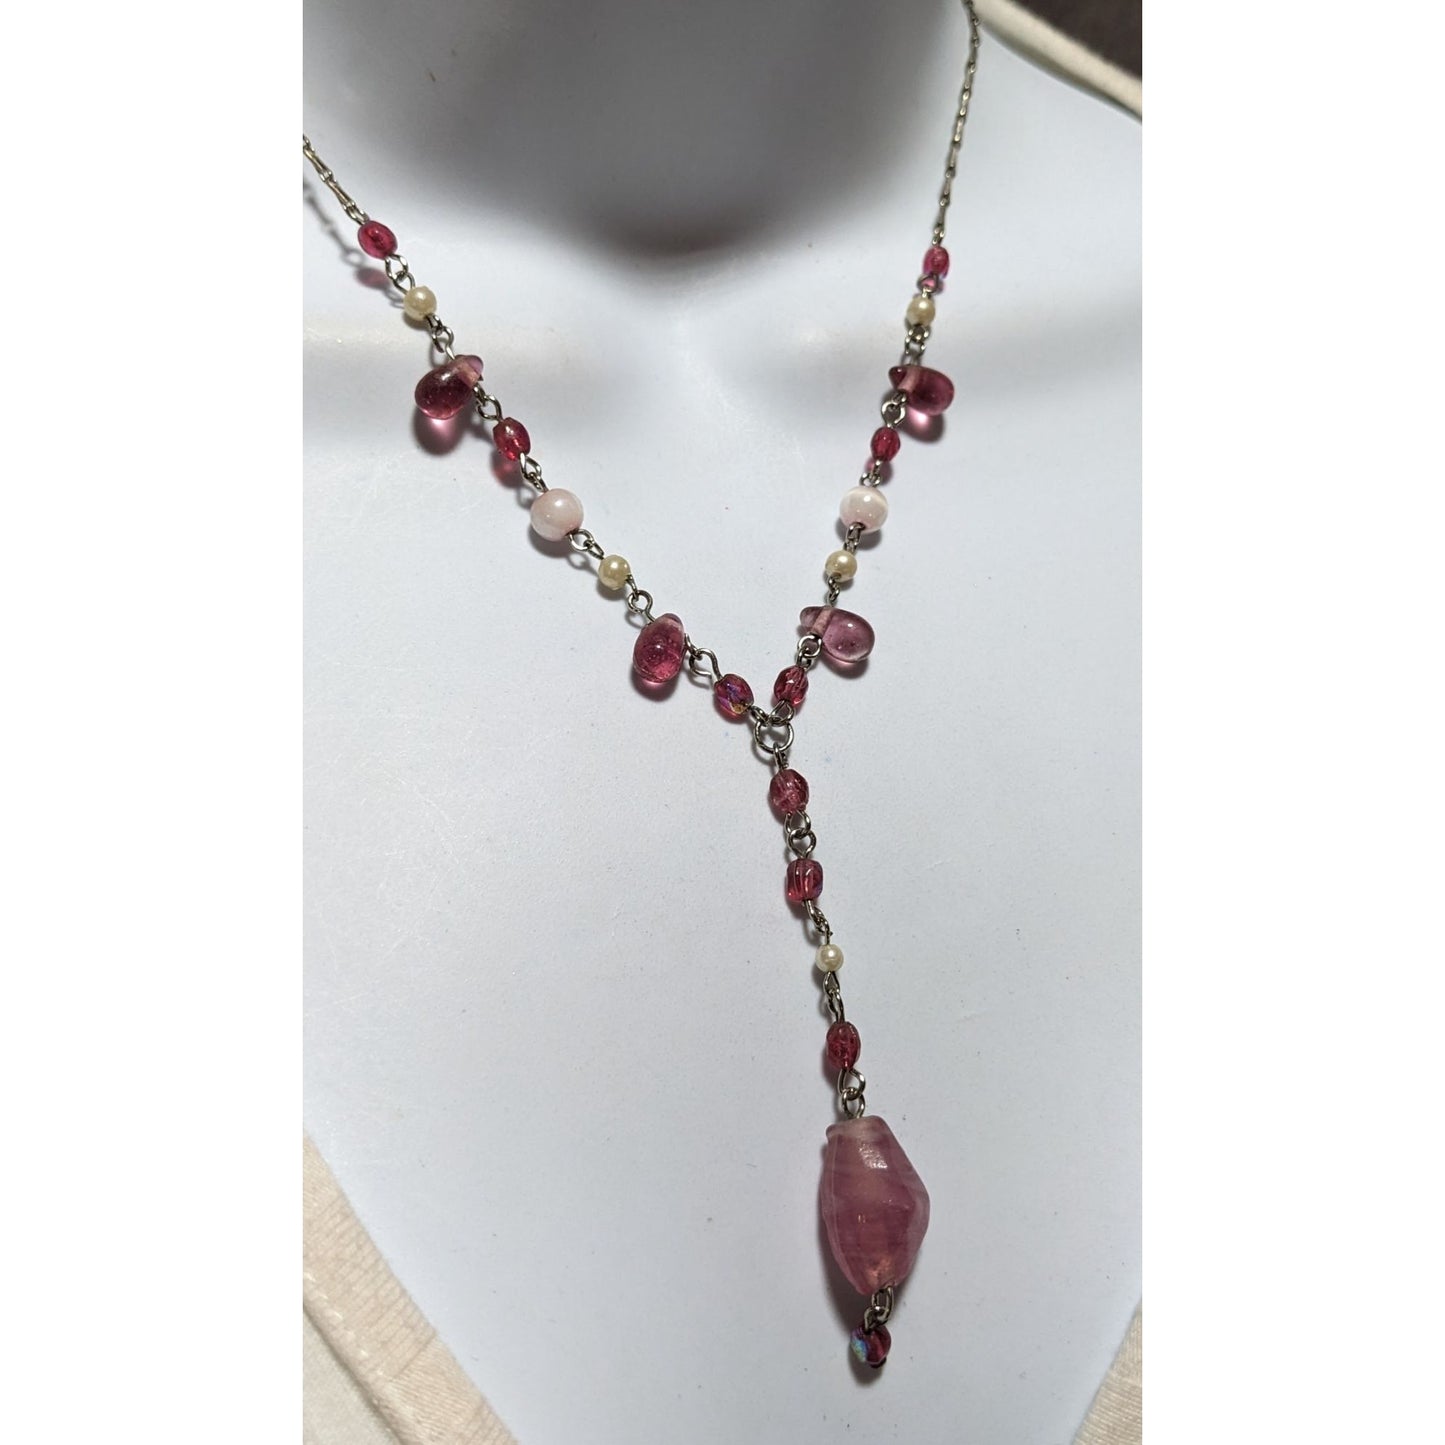 Pink Beaded Y-Necklace With Glass Pendant